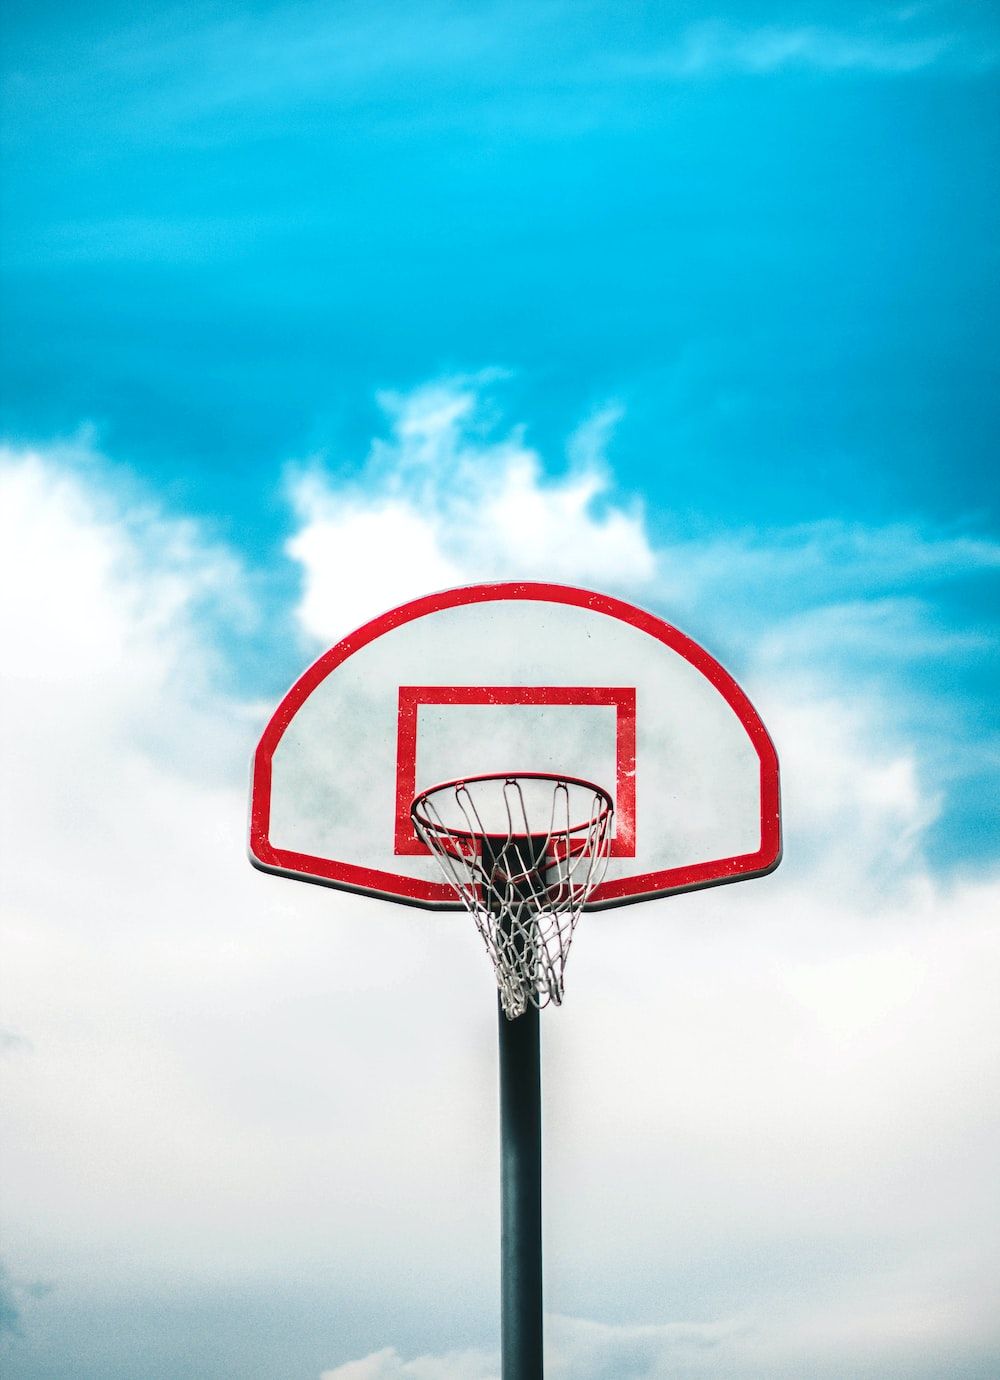 Basketball Net Picture. Download Free Image